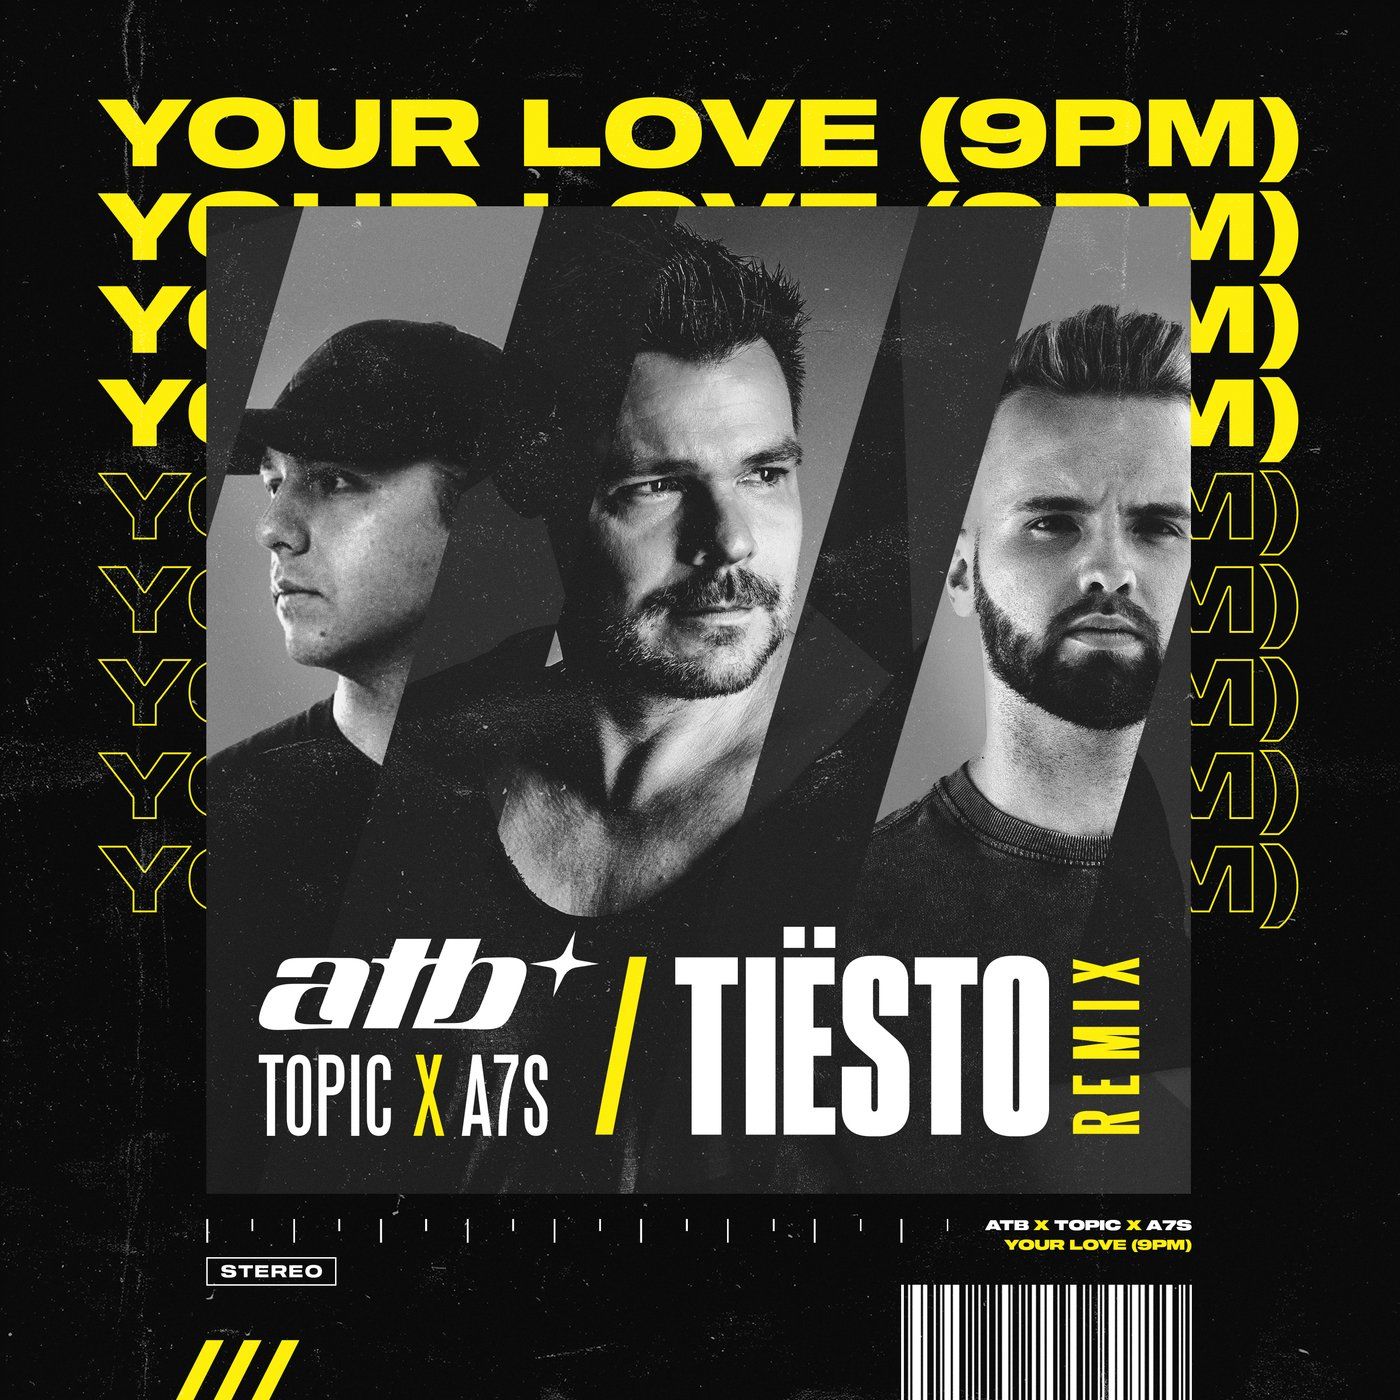 Art for Your Love by ATB, Topic, A7S, Tiësto